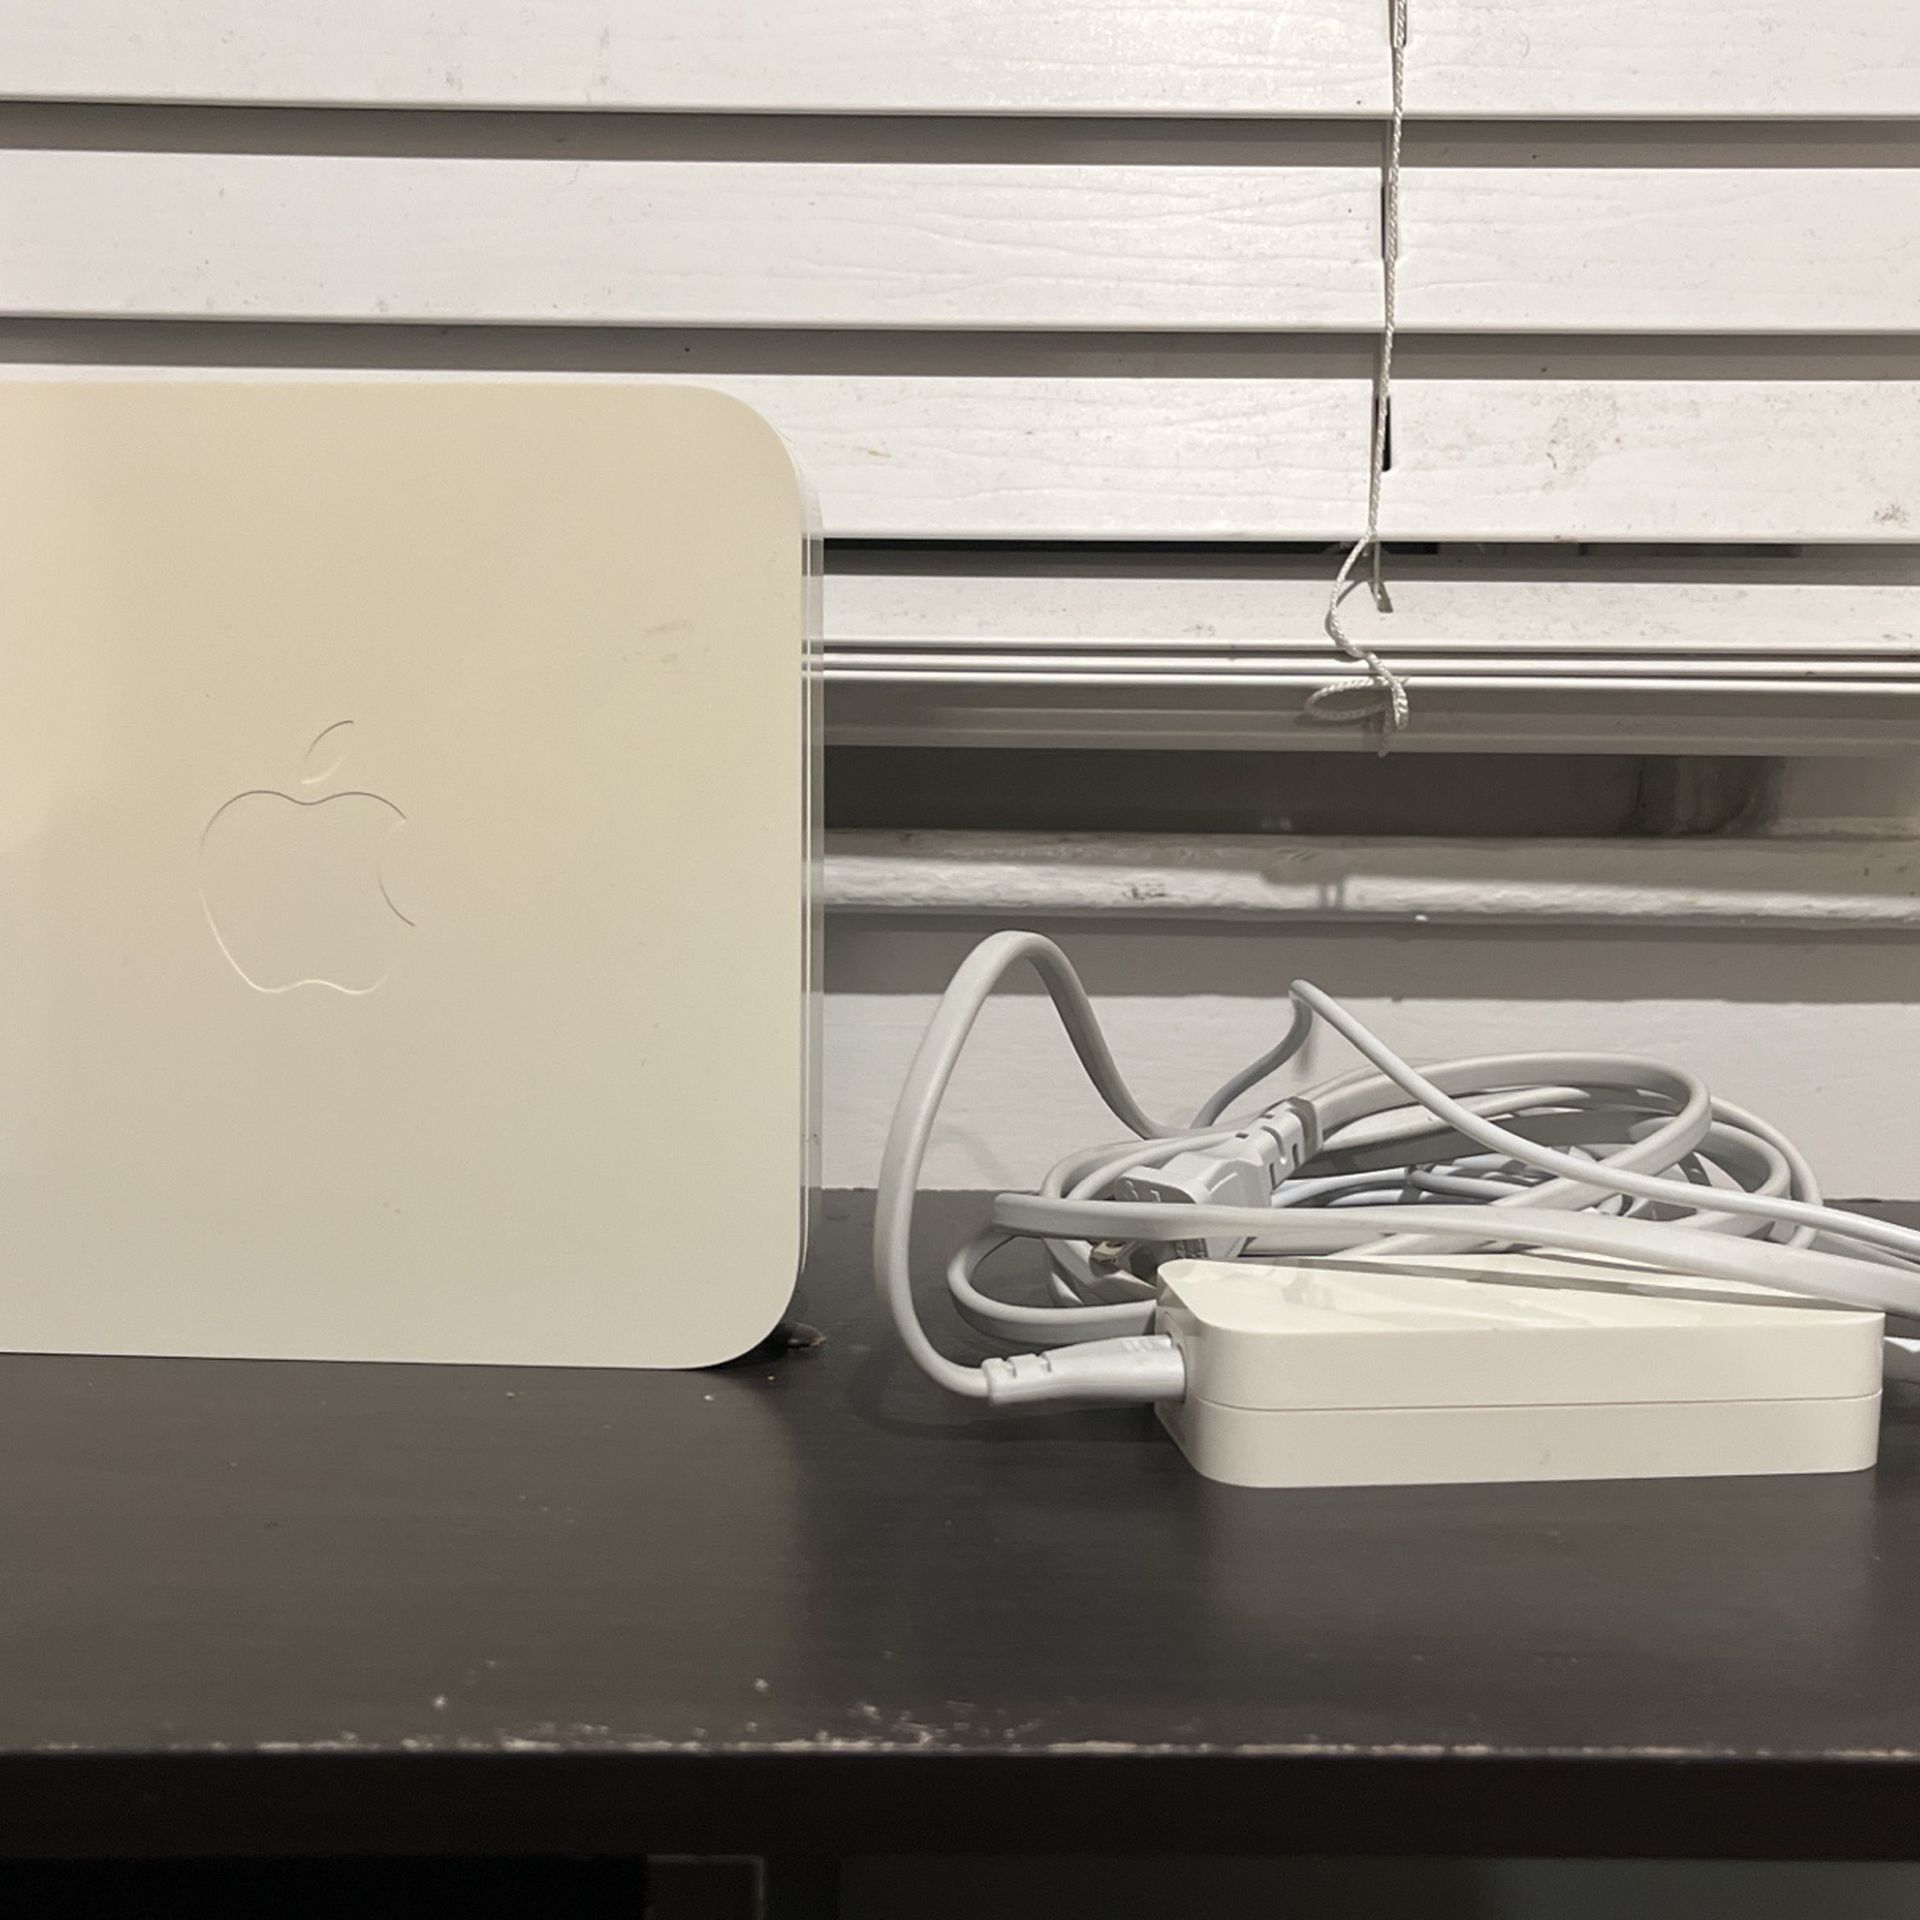 Apple  AirPort Extreme 802.11n Wi-Fi Wireless N Base Station ( A1143) CD-ROM